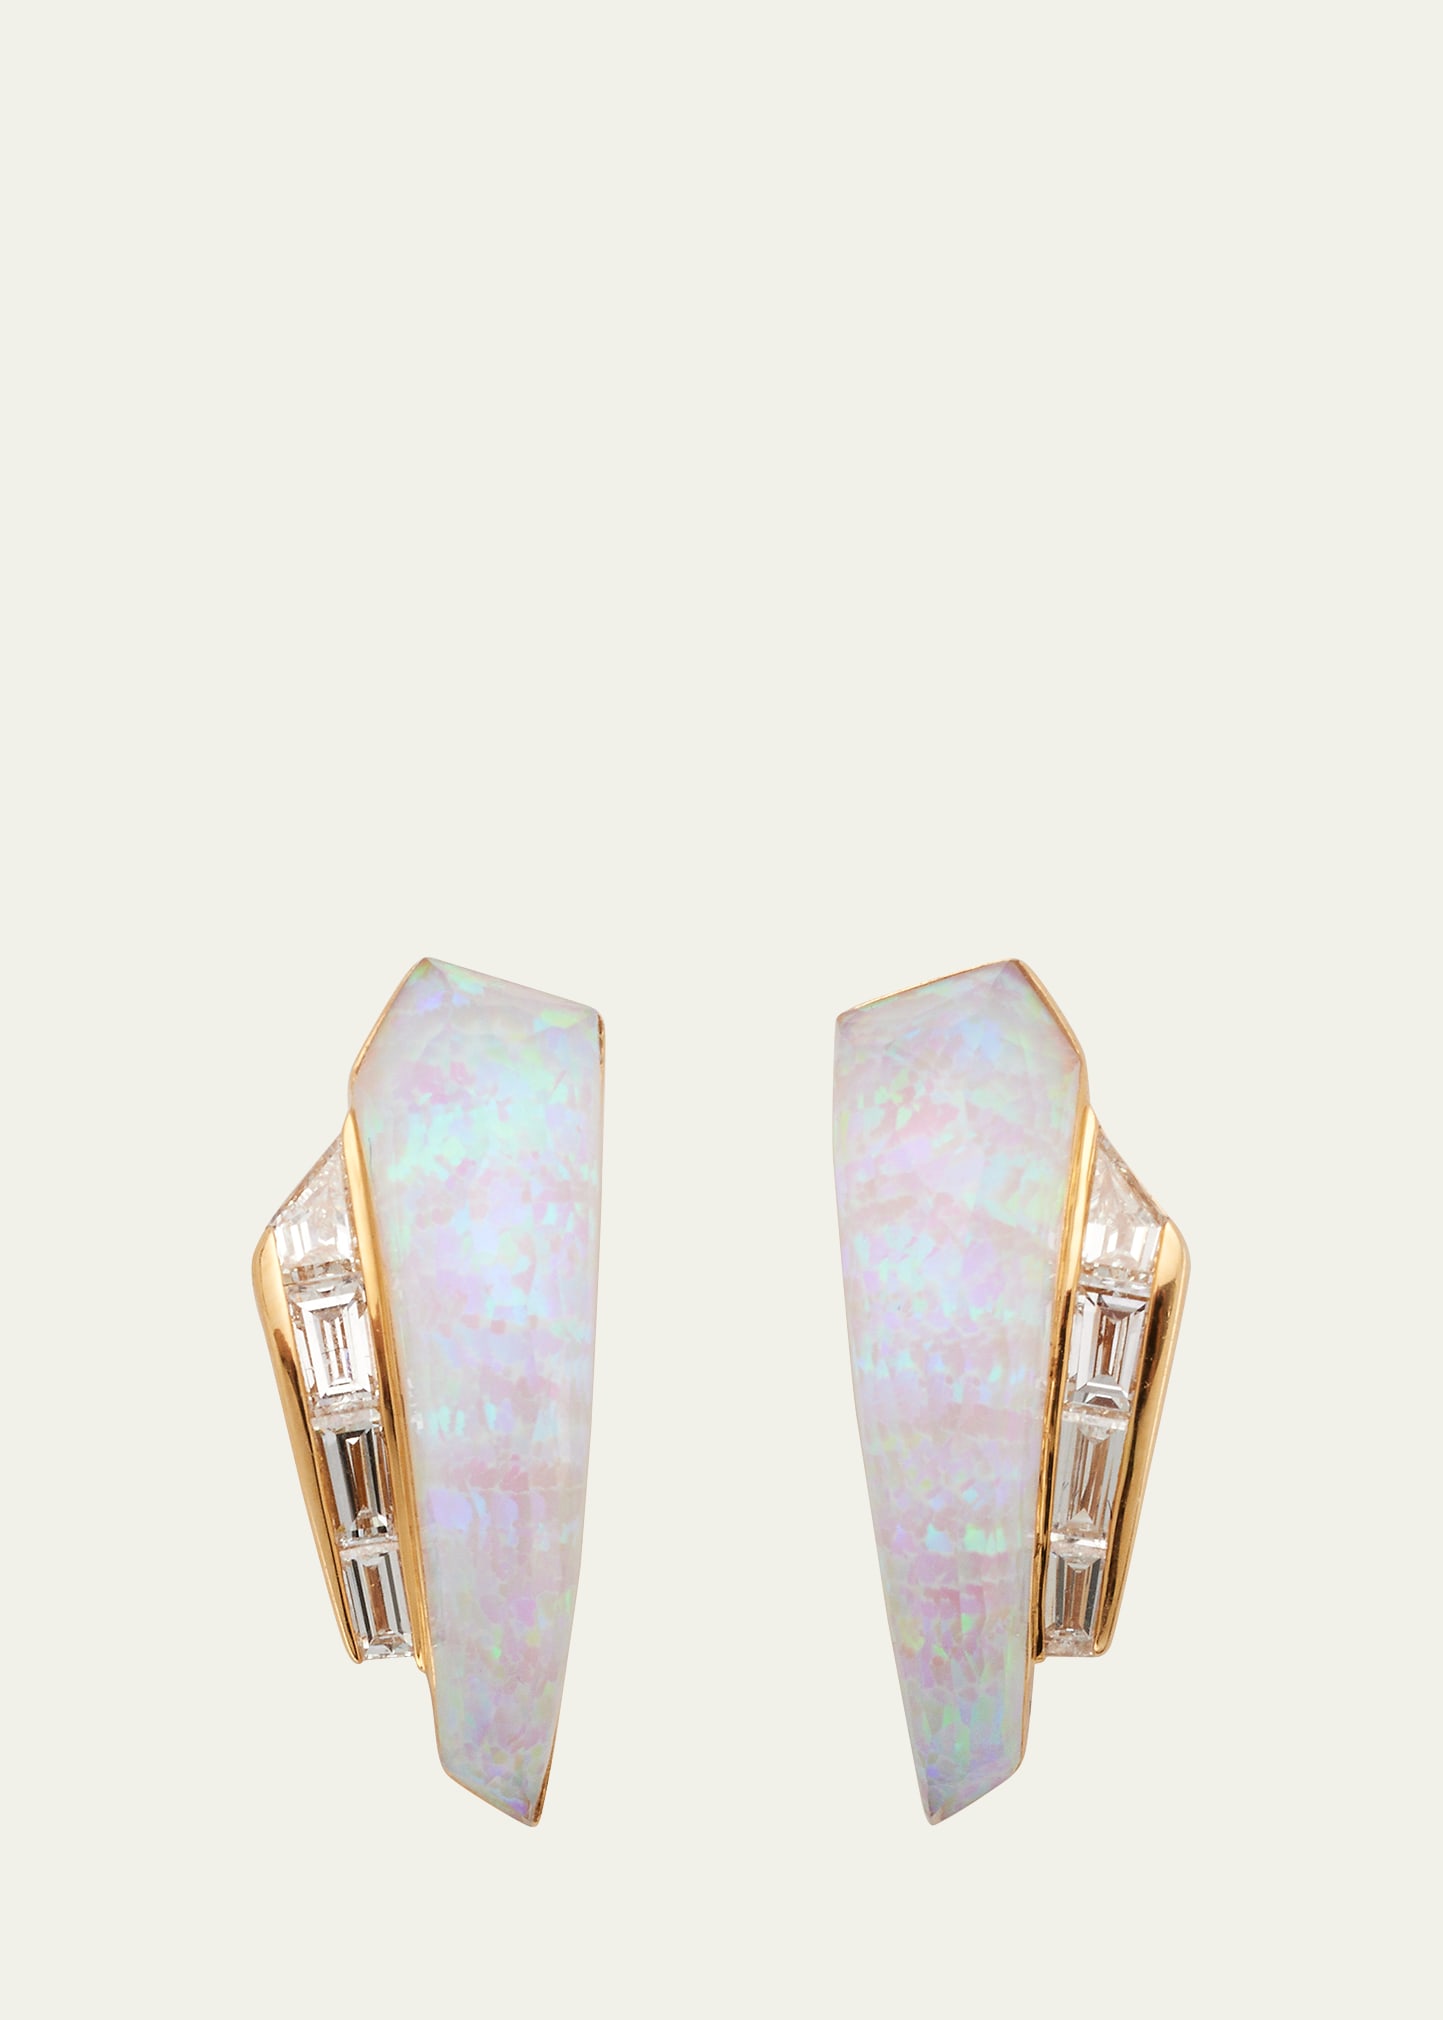 Stephen Webster 18k Yellow Gold Ch2 Slimline Cuff Earrings With White Opalescent Quartz Crystal Haze With Diamonds